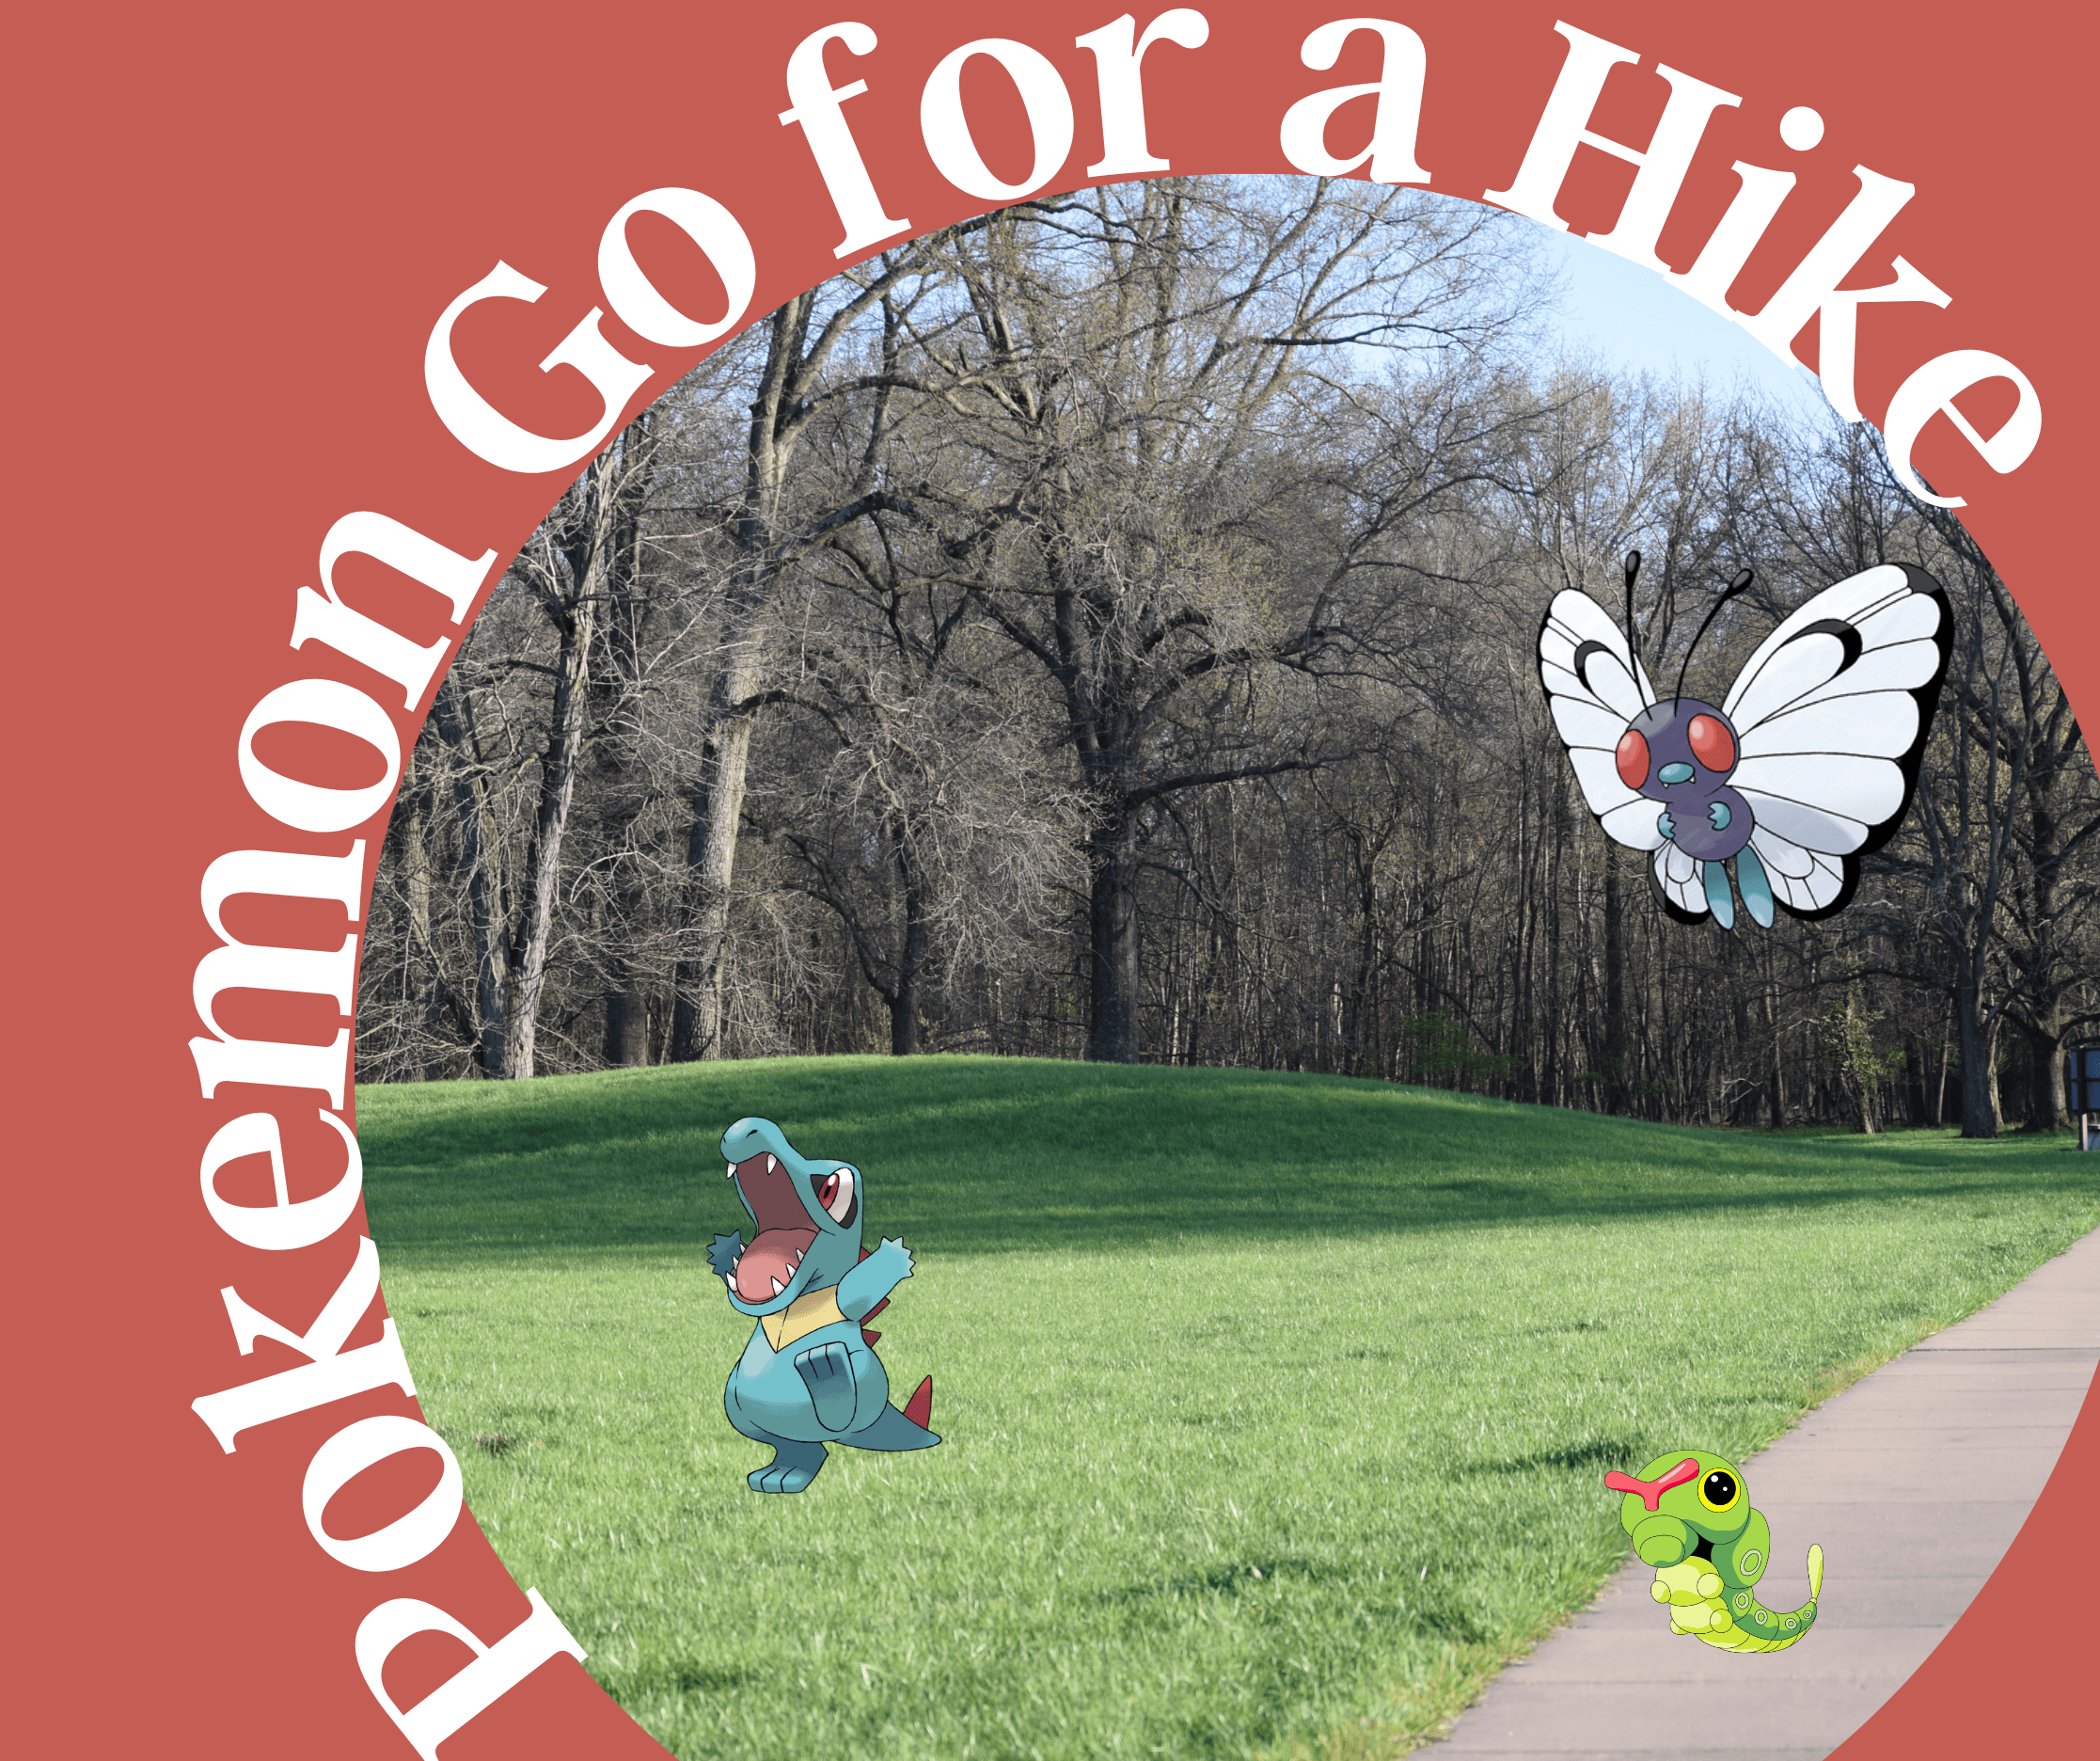 Pokemon Go for a Hike